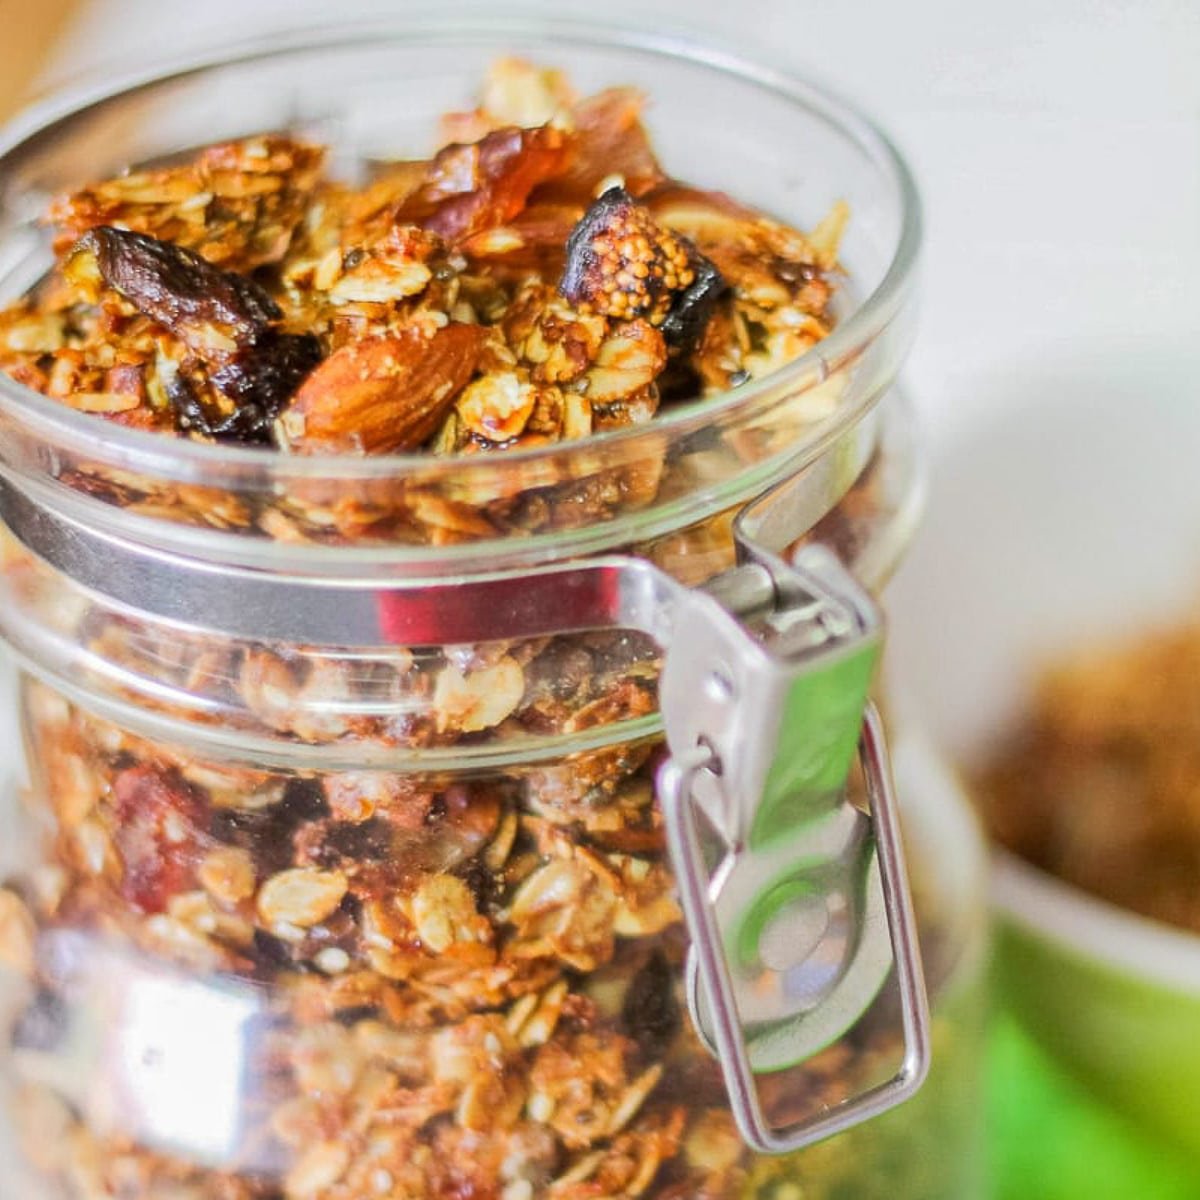 Homemade Granola Mix with a Middle Eastern twist | Hilda's Kitchen Blog